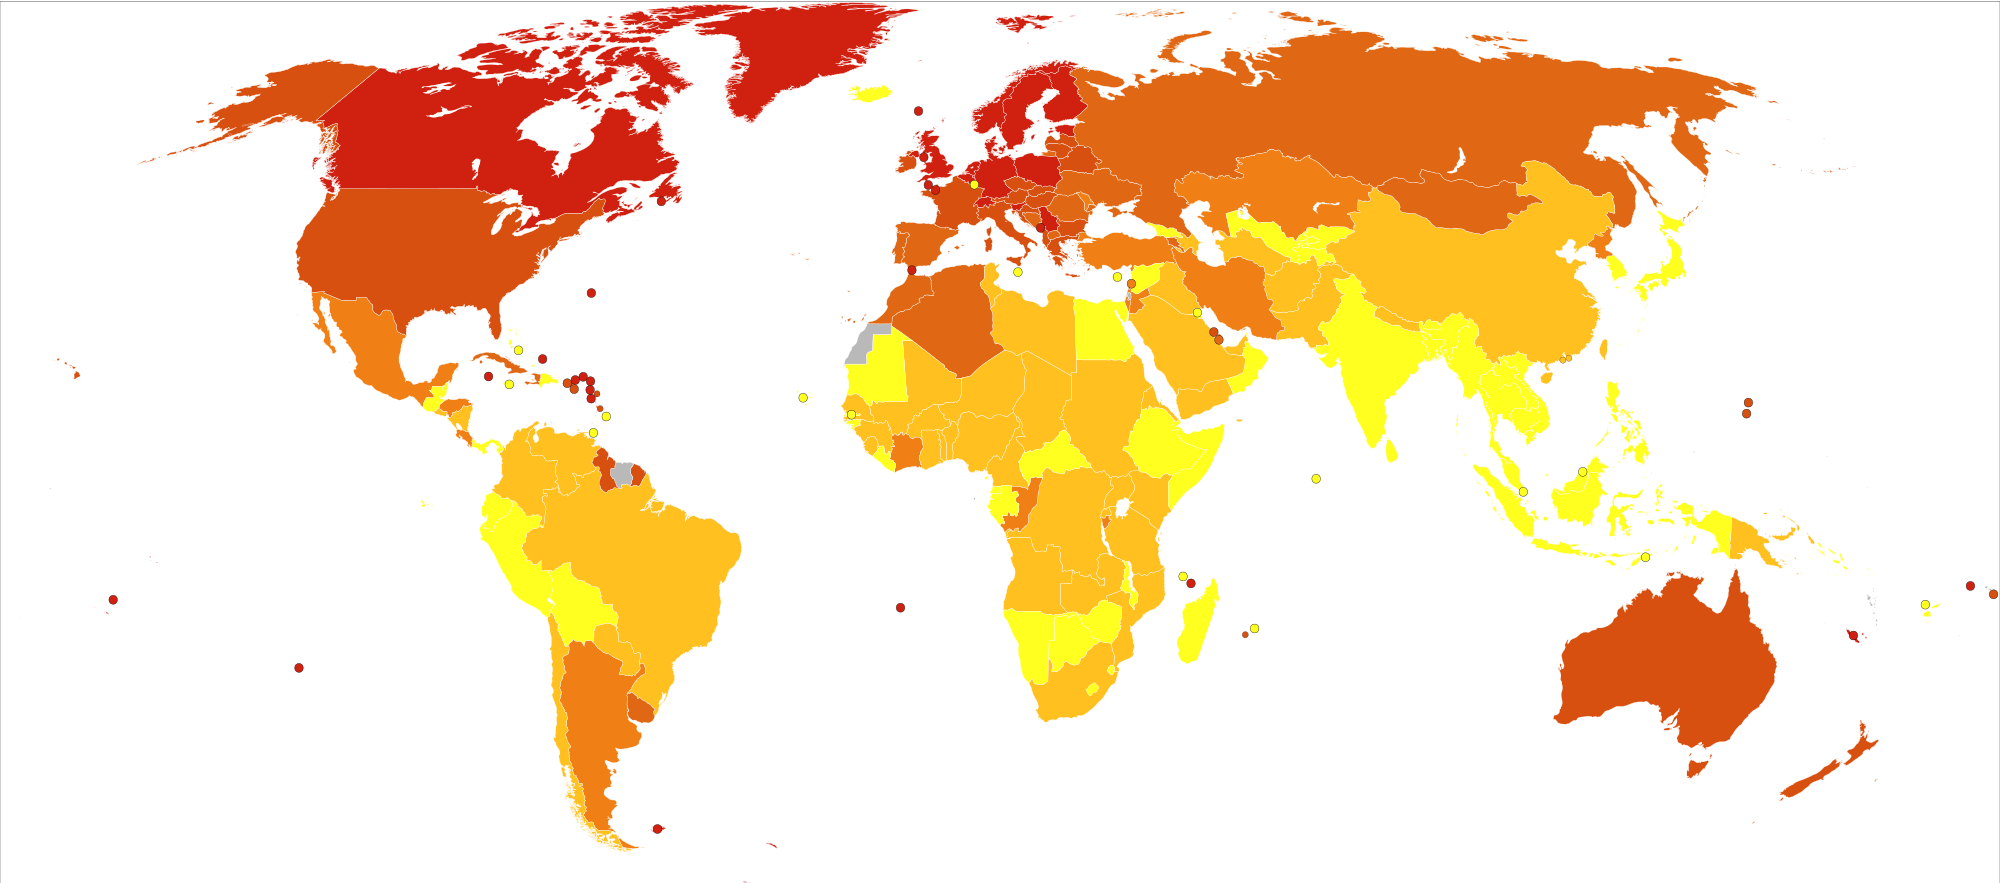 2000px-Multiple_sclerosis_world_map-Deaths_per_million_persons-WHO2012.svg.png